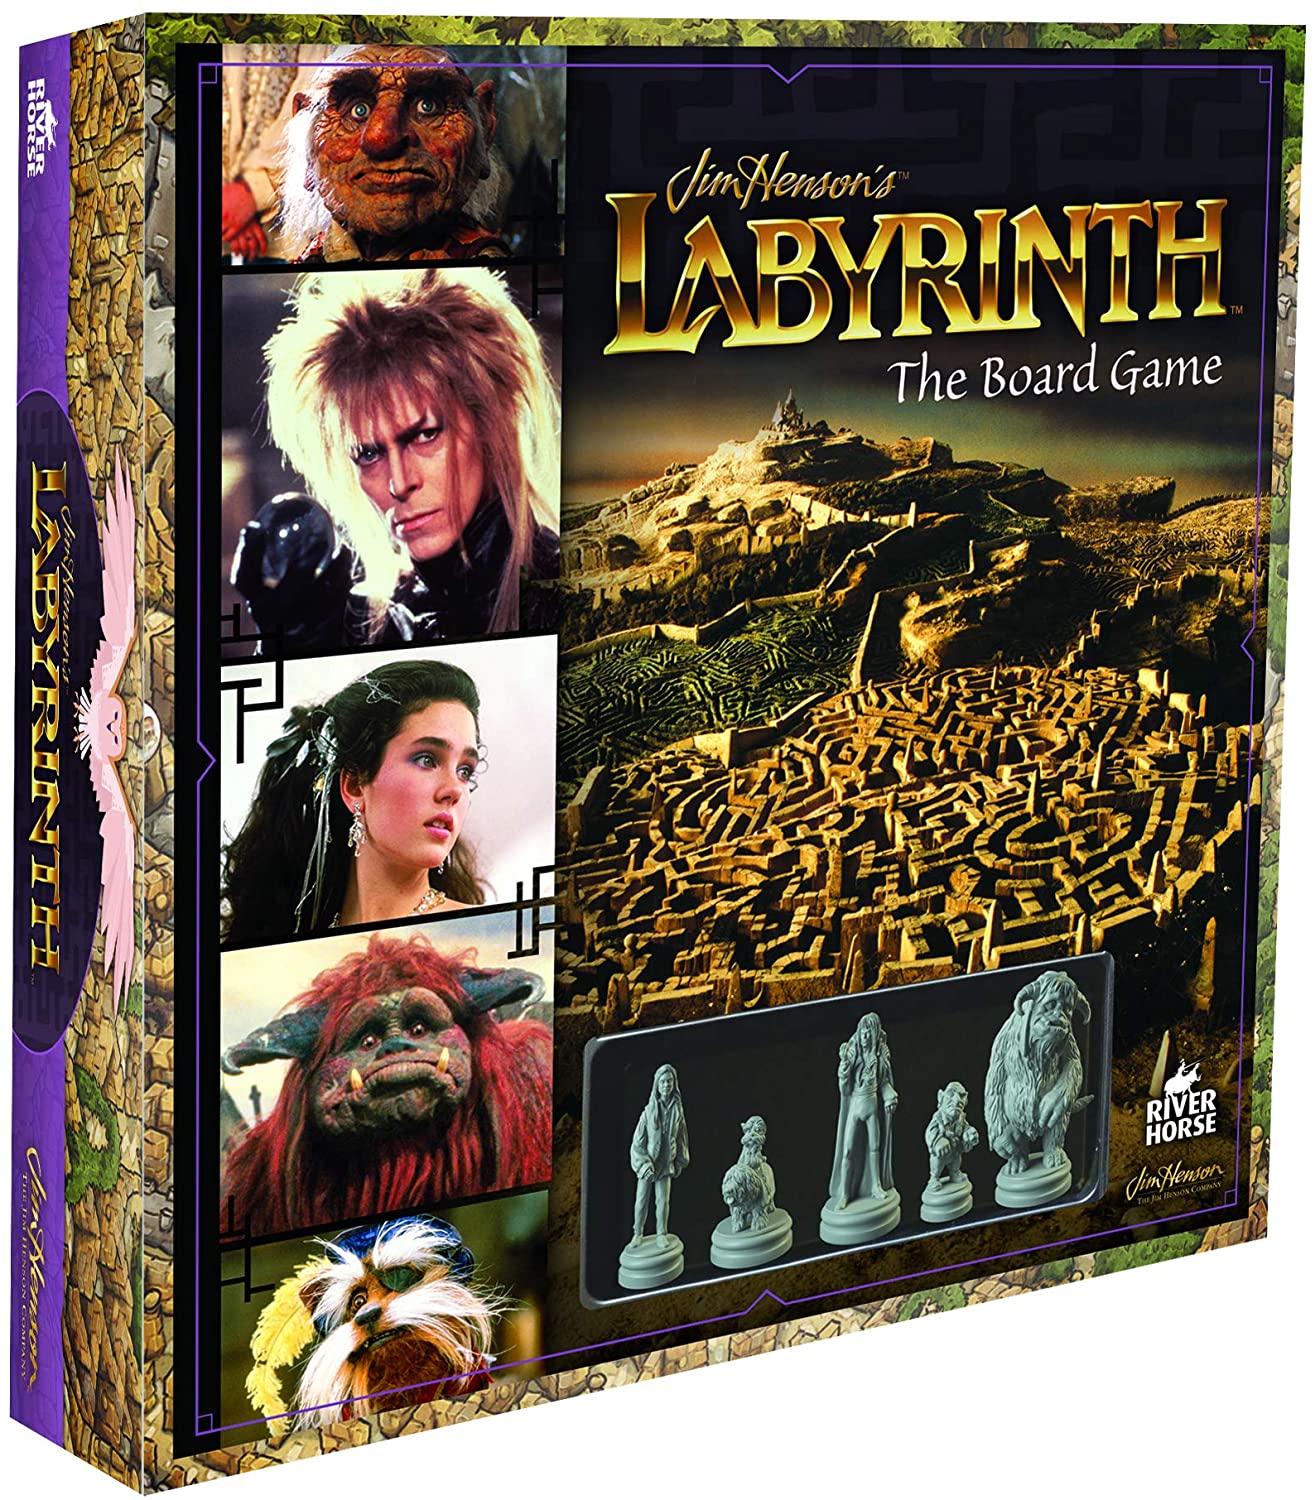 (BSG Certified USED) Jim Henson's Labyrinth: The Board Game